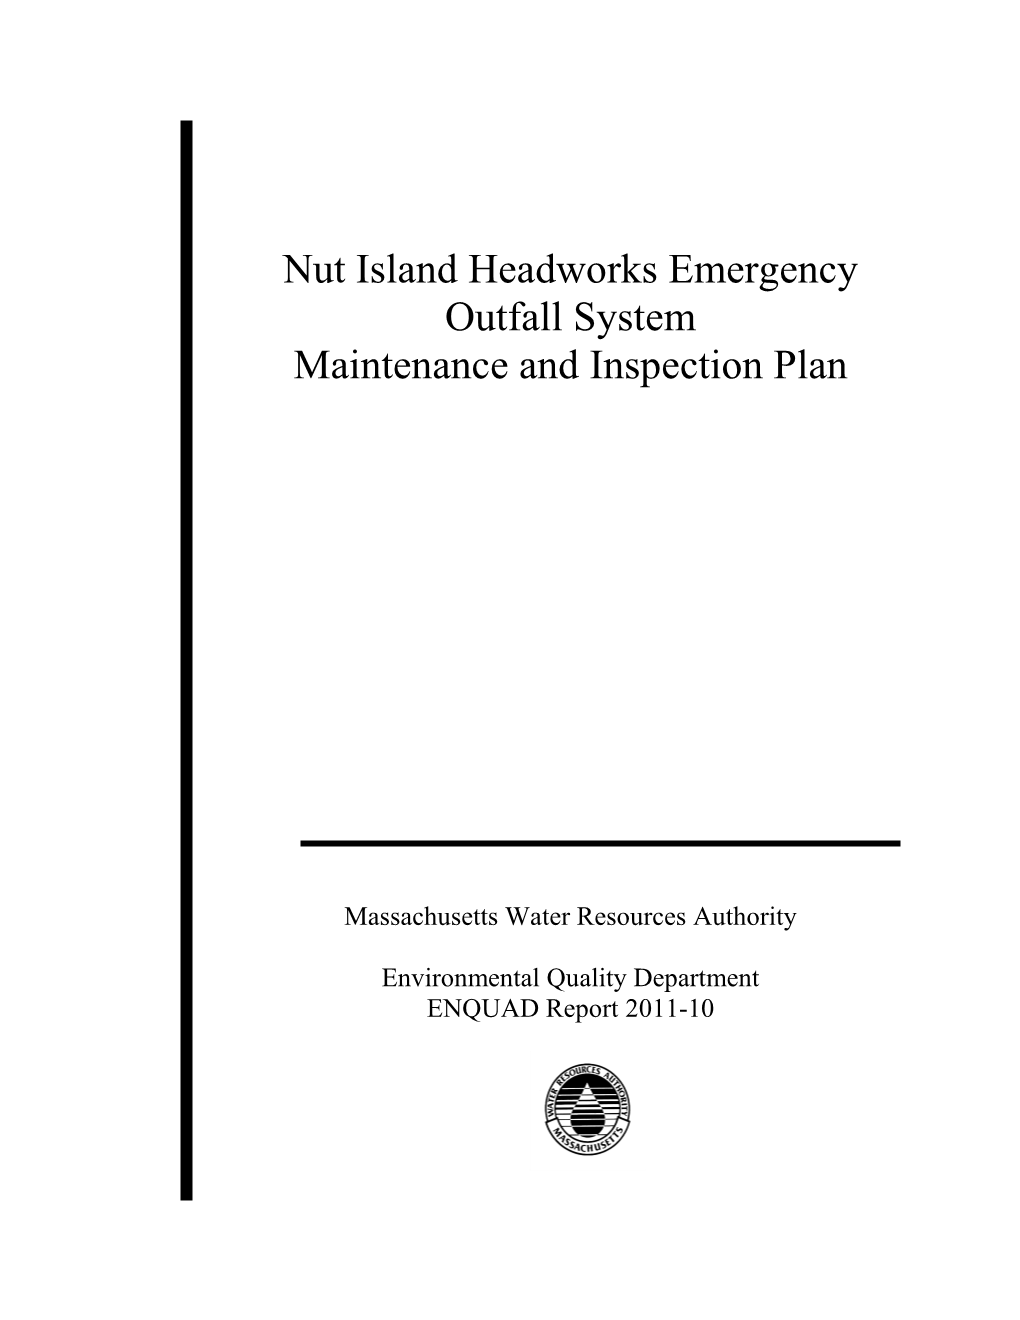 Nut Island Headworks Emergency Outfall System Maintenance and Inspection Plan